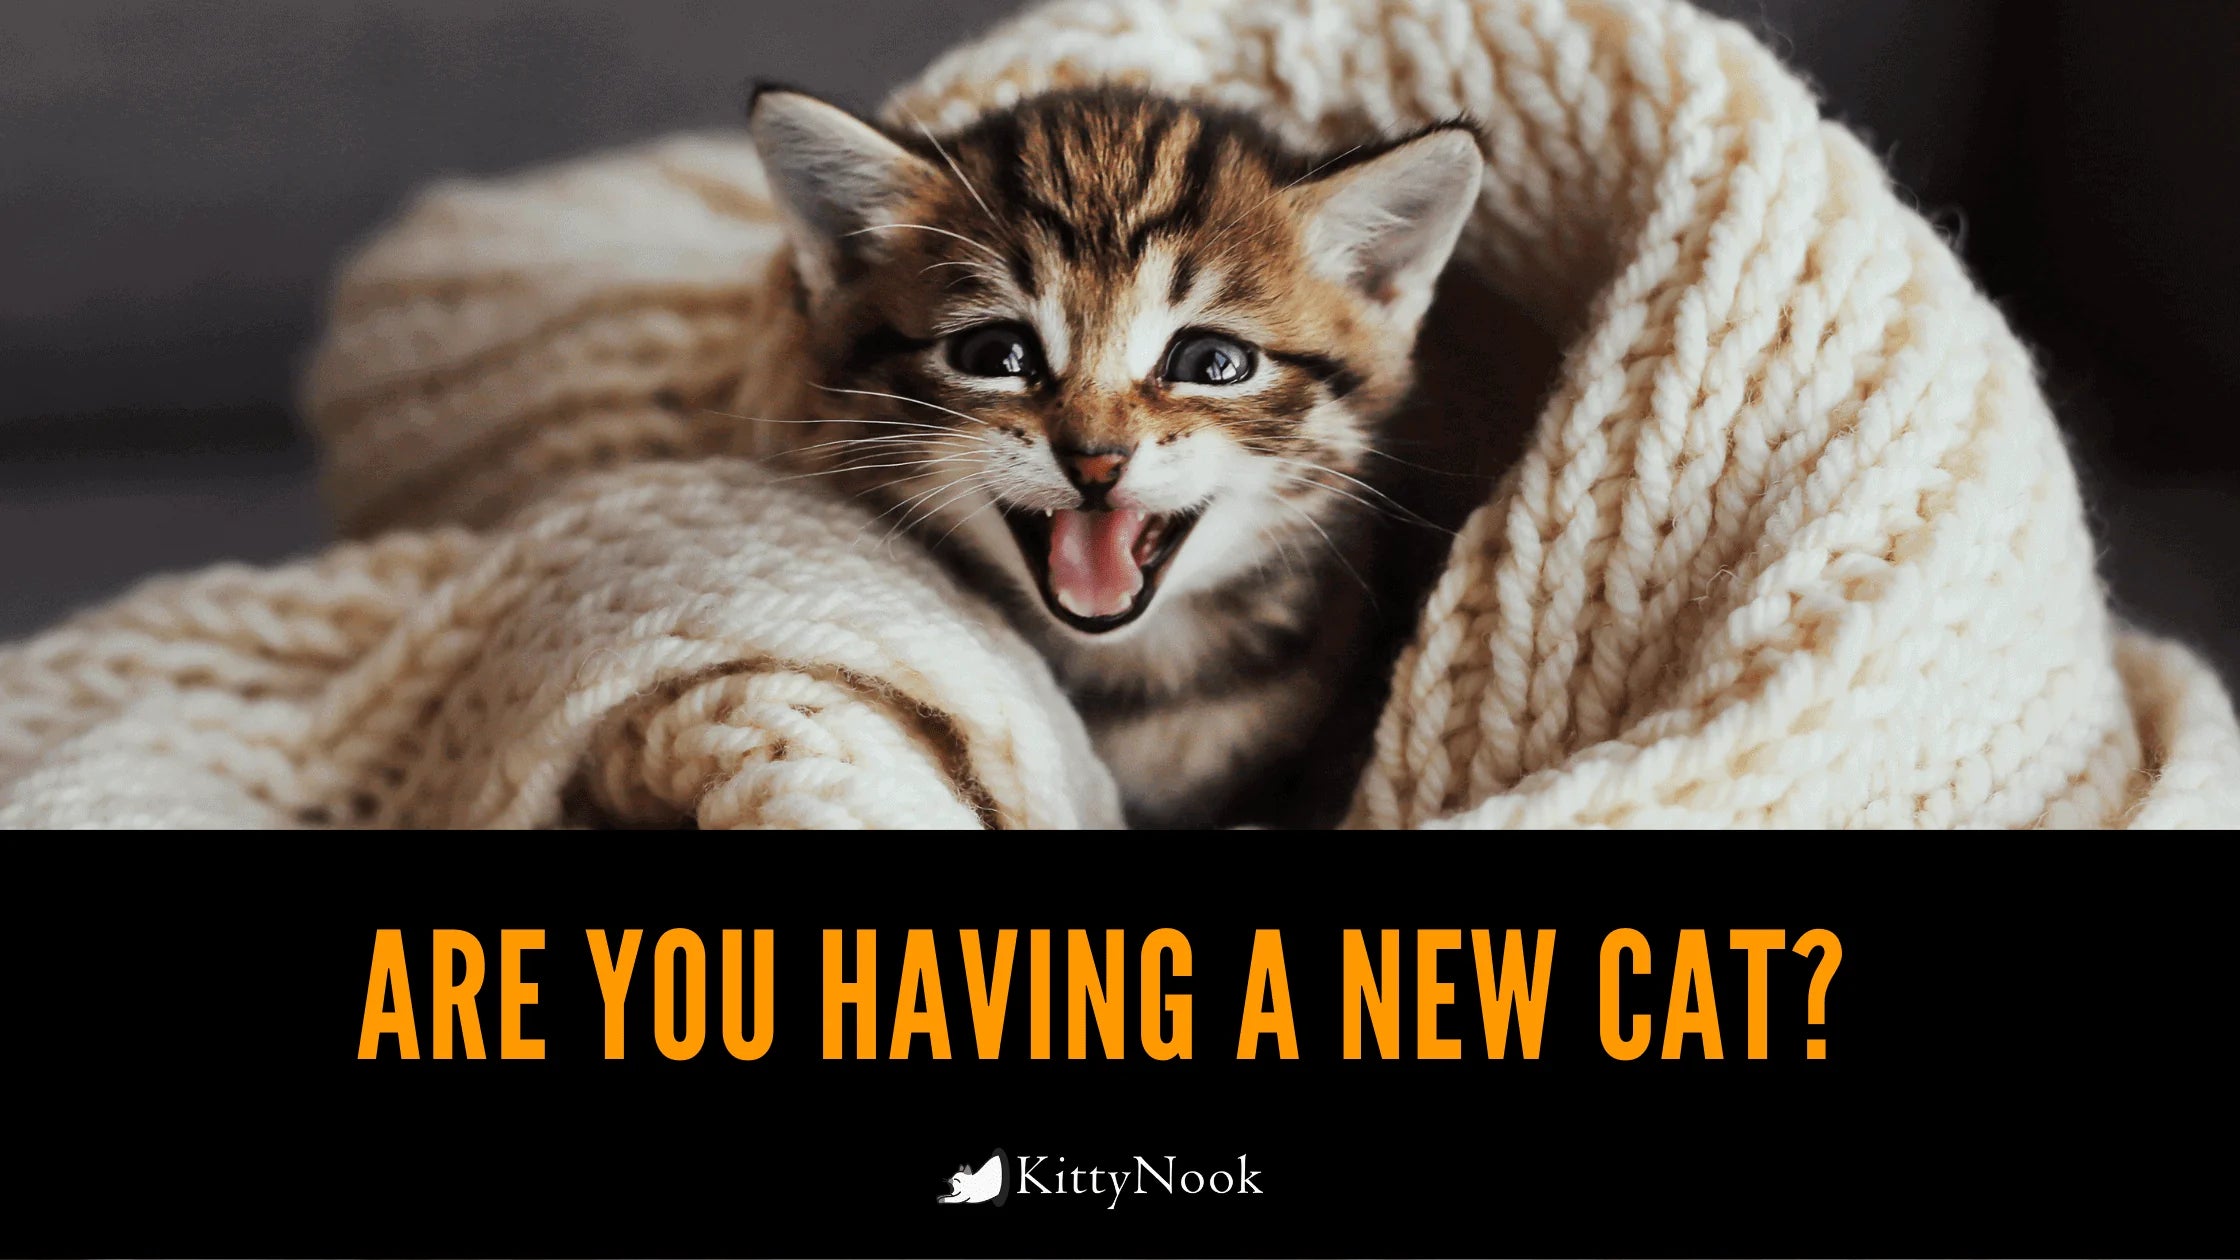 Are You Having A New Cat? Here's A Checklist Of Items That You Should Have! - KittyNook Cat Company